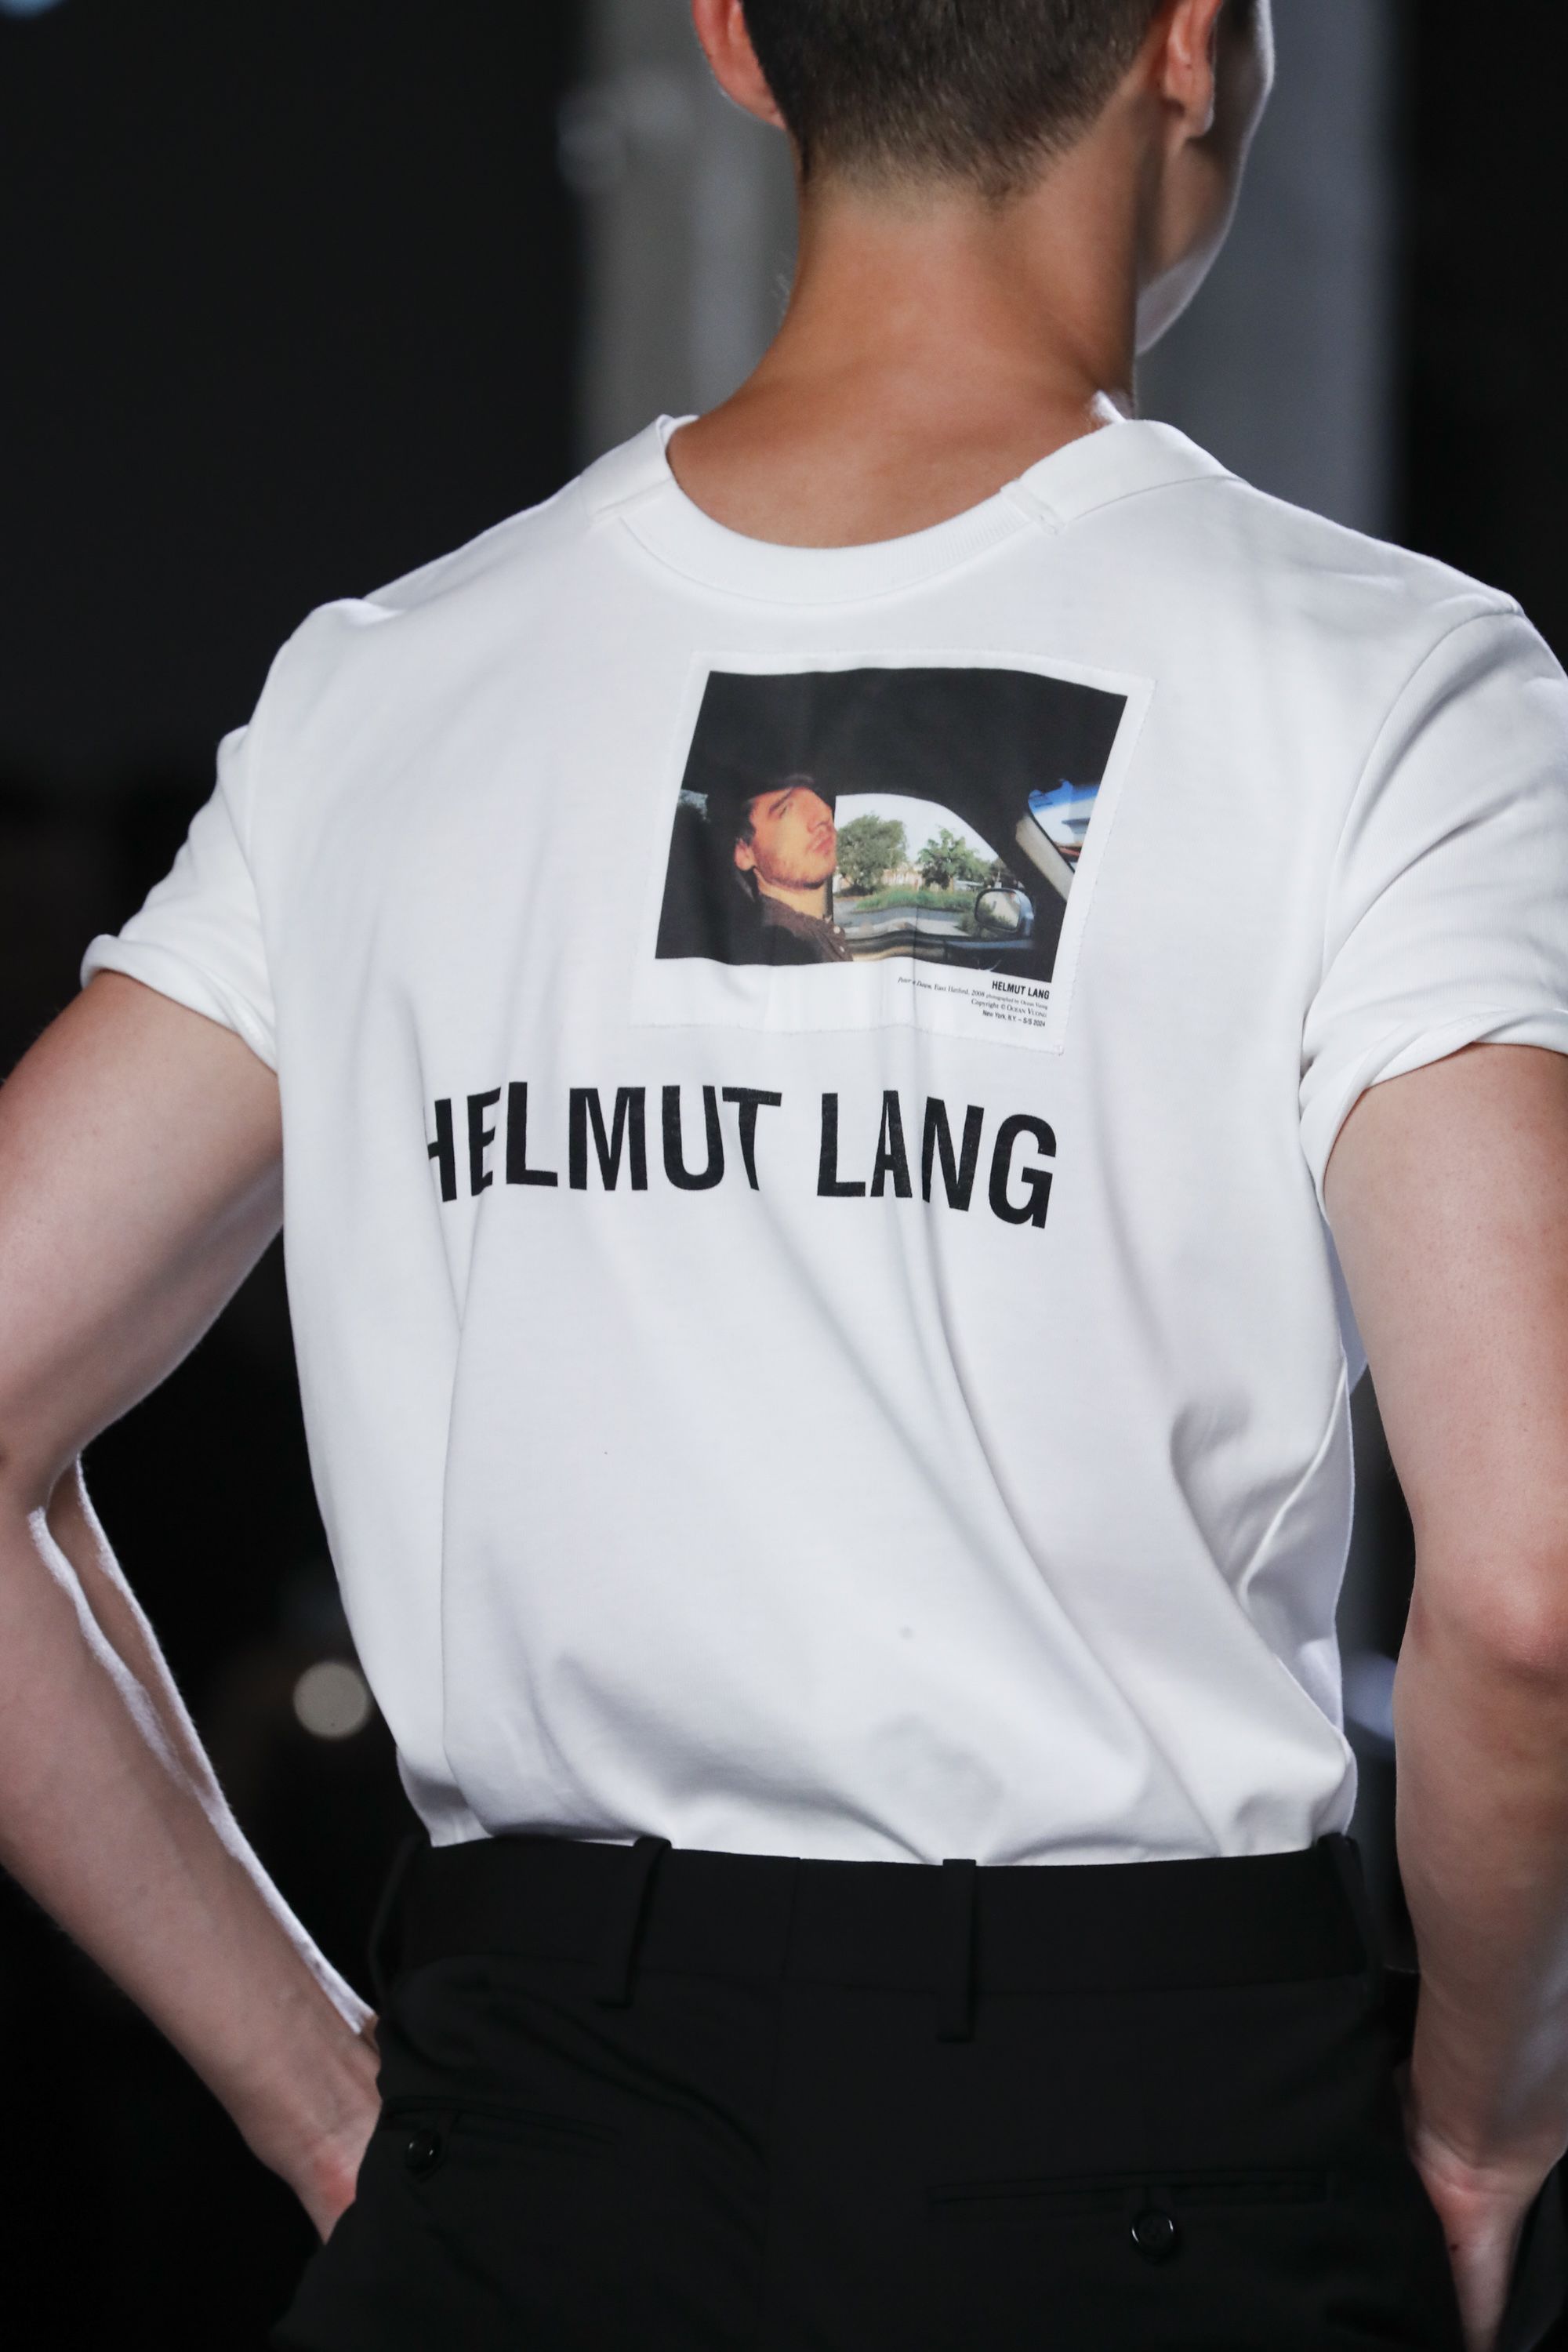 Helmut Lang: The Most Important Fashion Designer of the Nineties